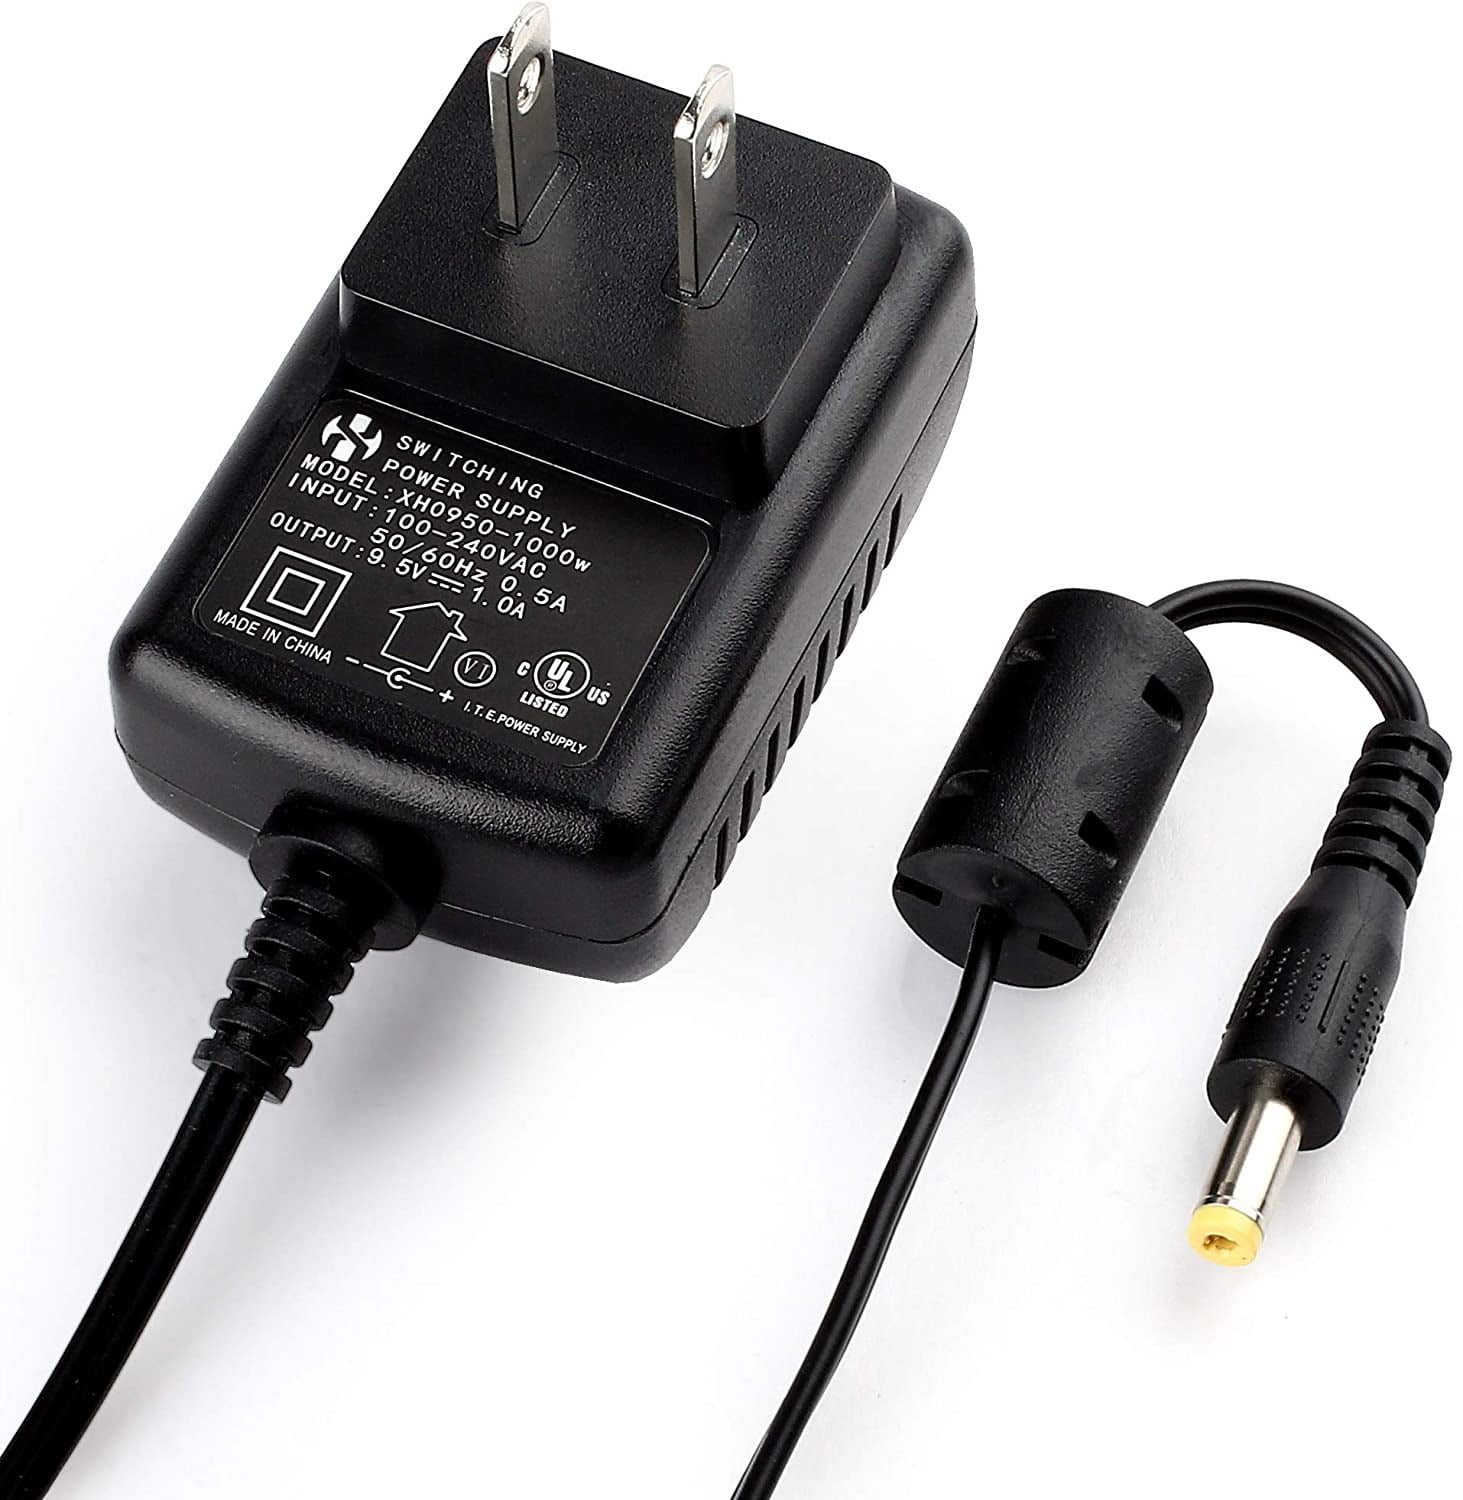 Adaptador Ac Upbright Ac-dc Adapter Compatible With Snow S 